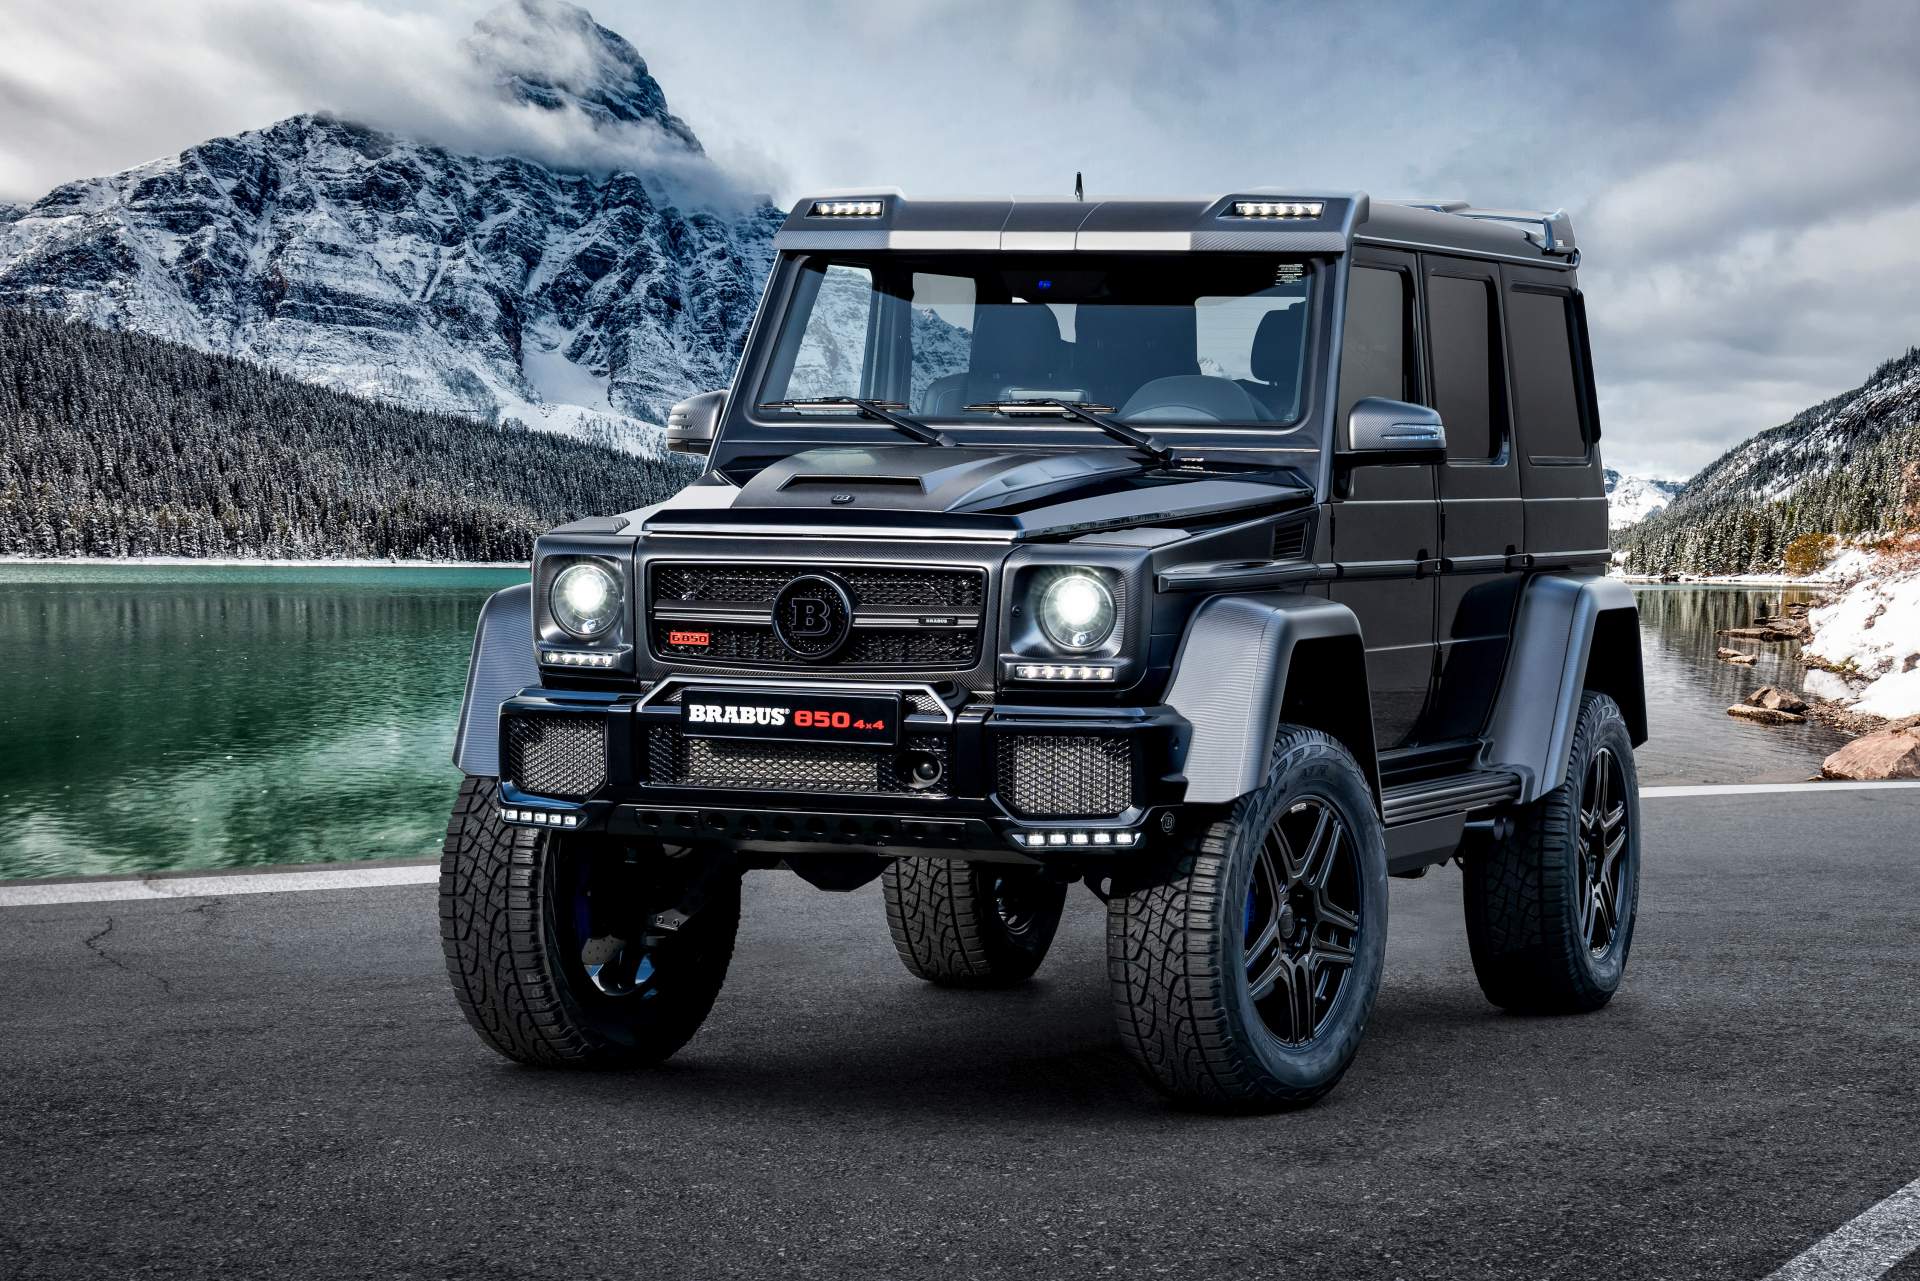 Brabus 850 6 0 Biturbo 4x4 Final Edition 1 Of 5 Costs 550 000 Carscoops